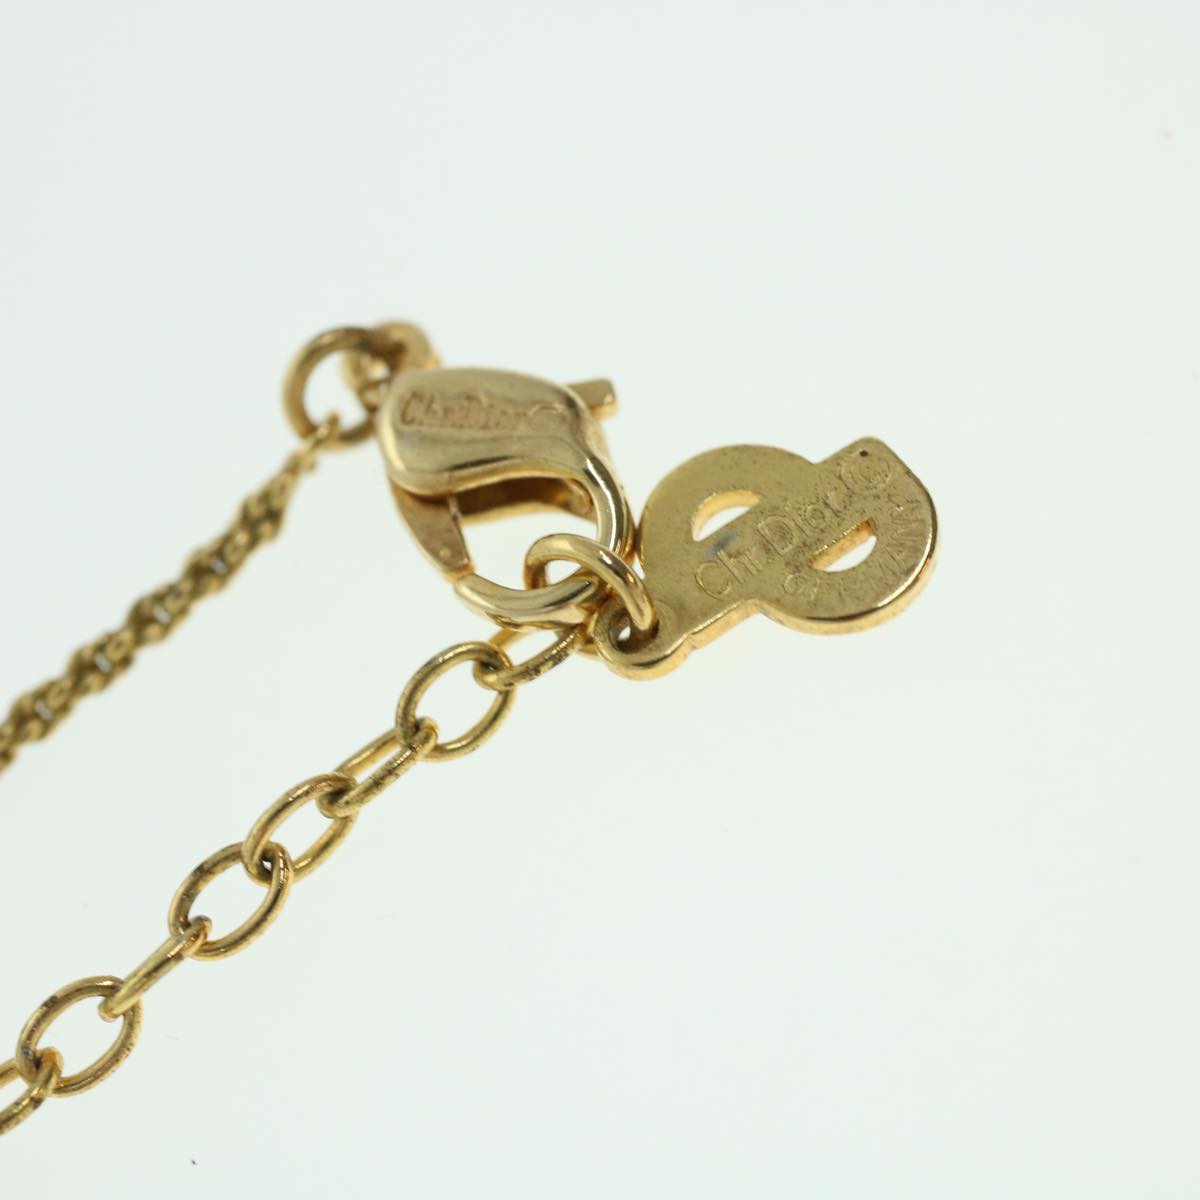 Christian Dior Necklace Gold Tone Auth yk6743B